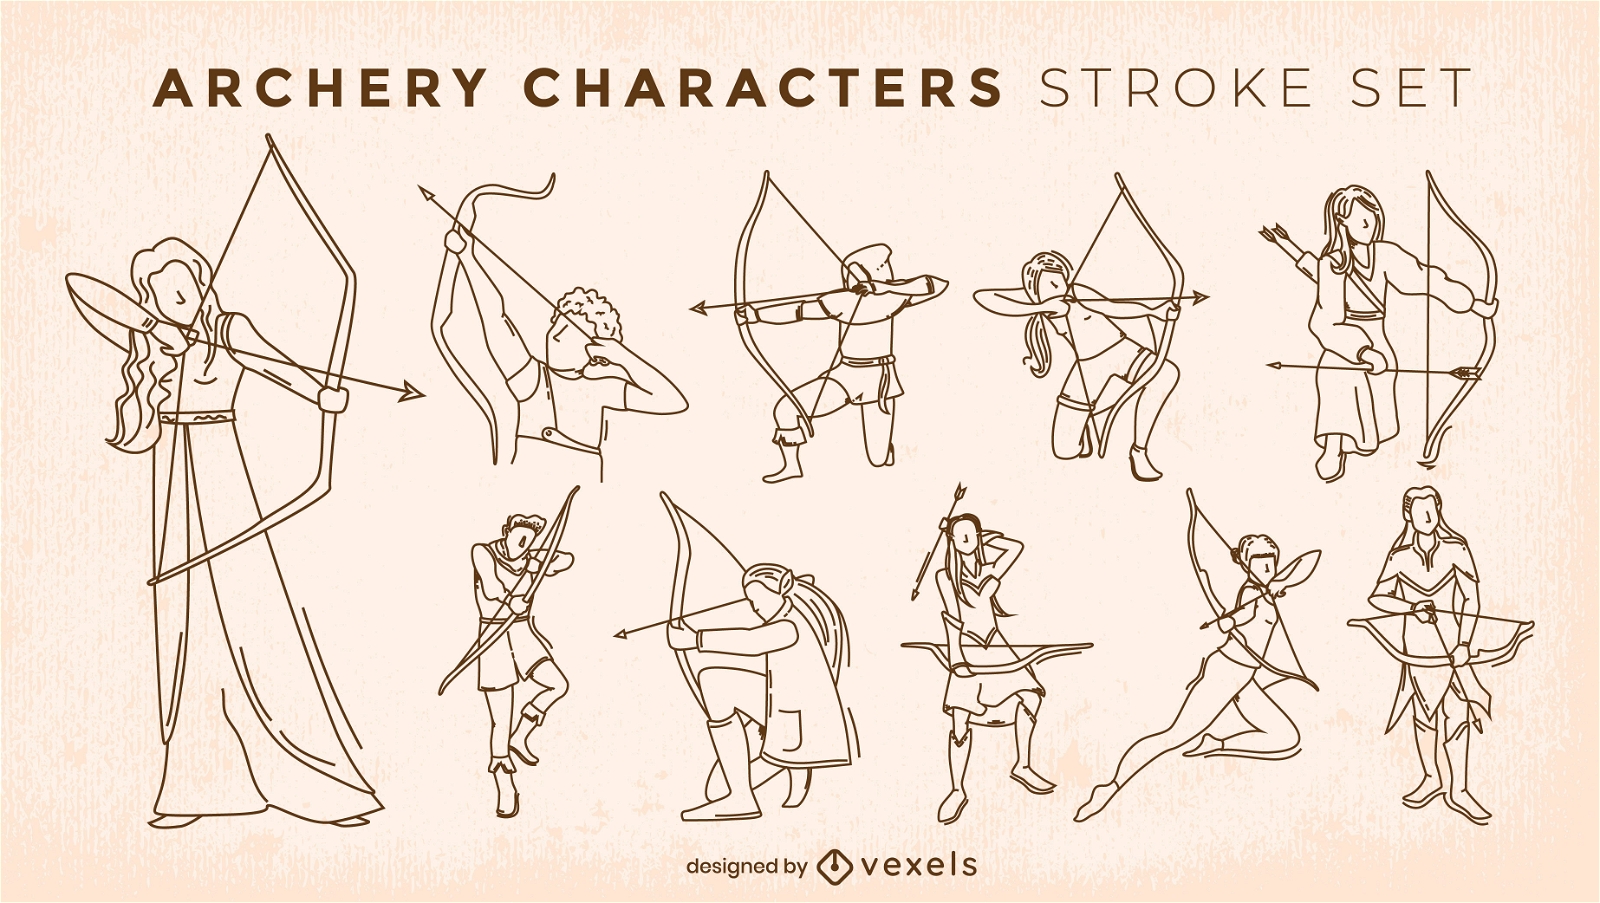 More free drawing references on my... - Poses for Artists | Facebook